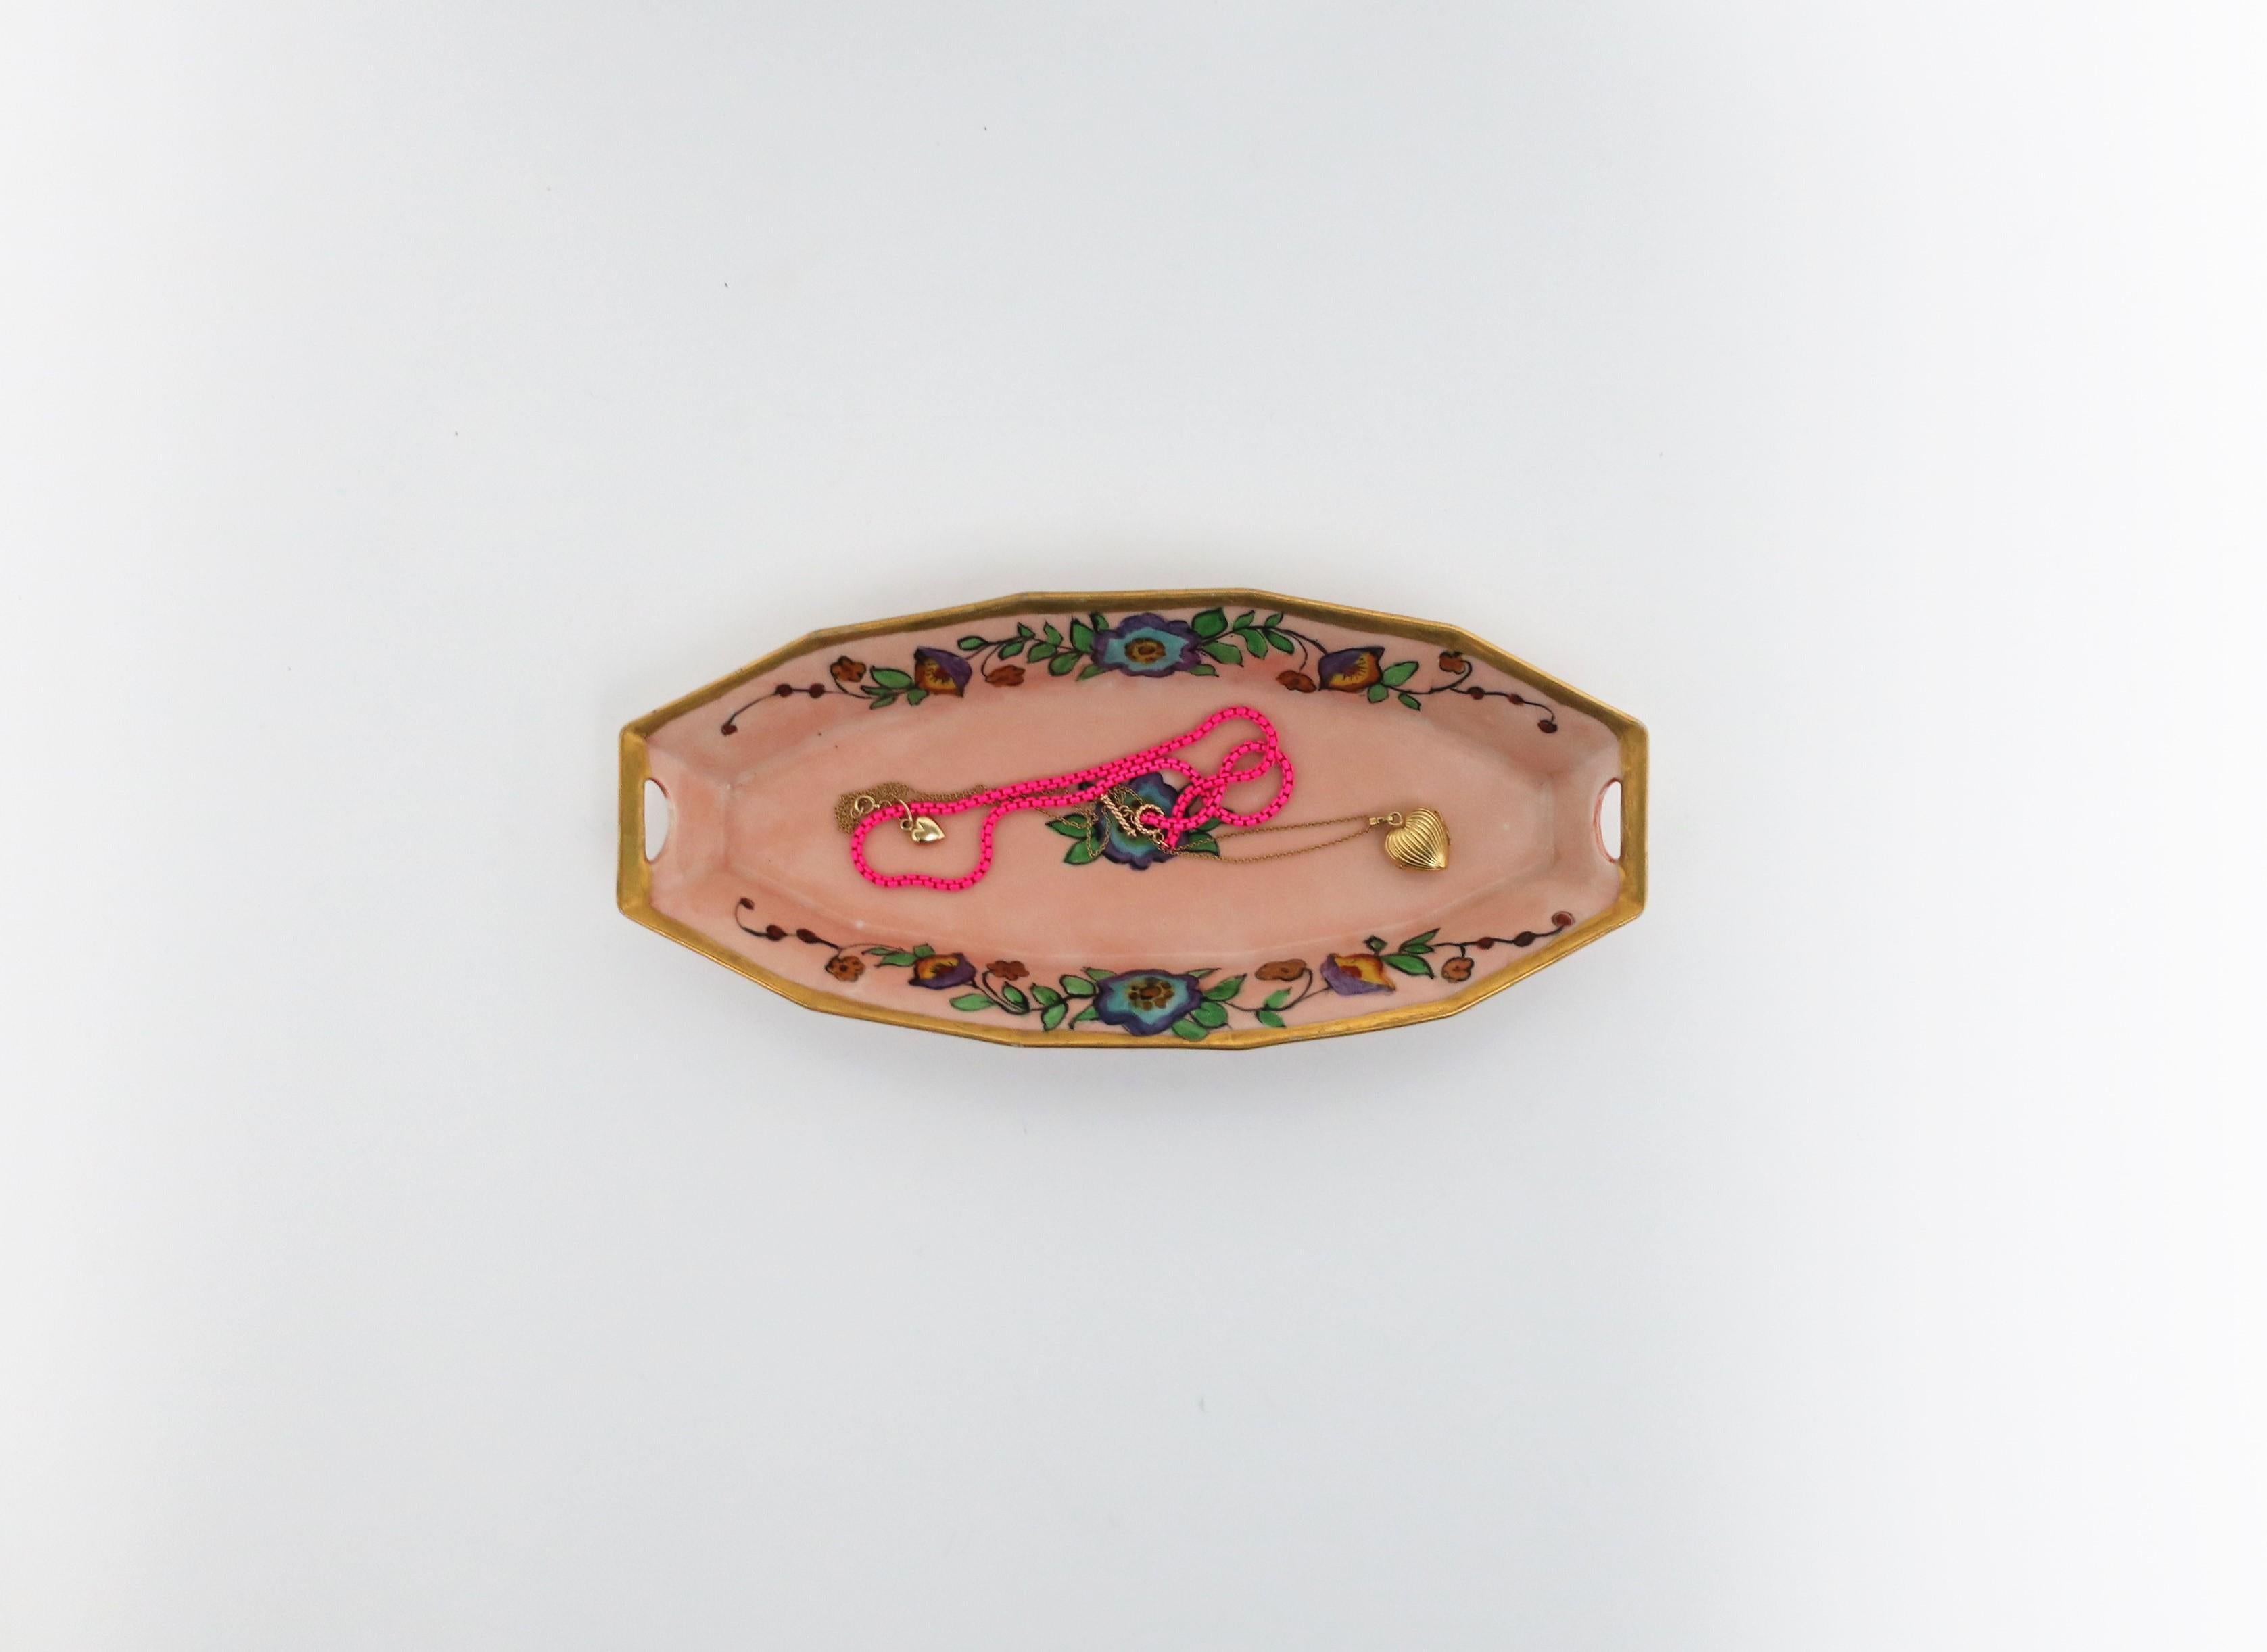 A beautiful Austrian Art Nouveau porcelain pink and gold oblong dish, circa early 20th century, Austria. Piece has hand painted design of flowers and leaves at center and on sides, finished with a shimmering gold edge. Beautiful as a standalone